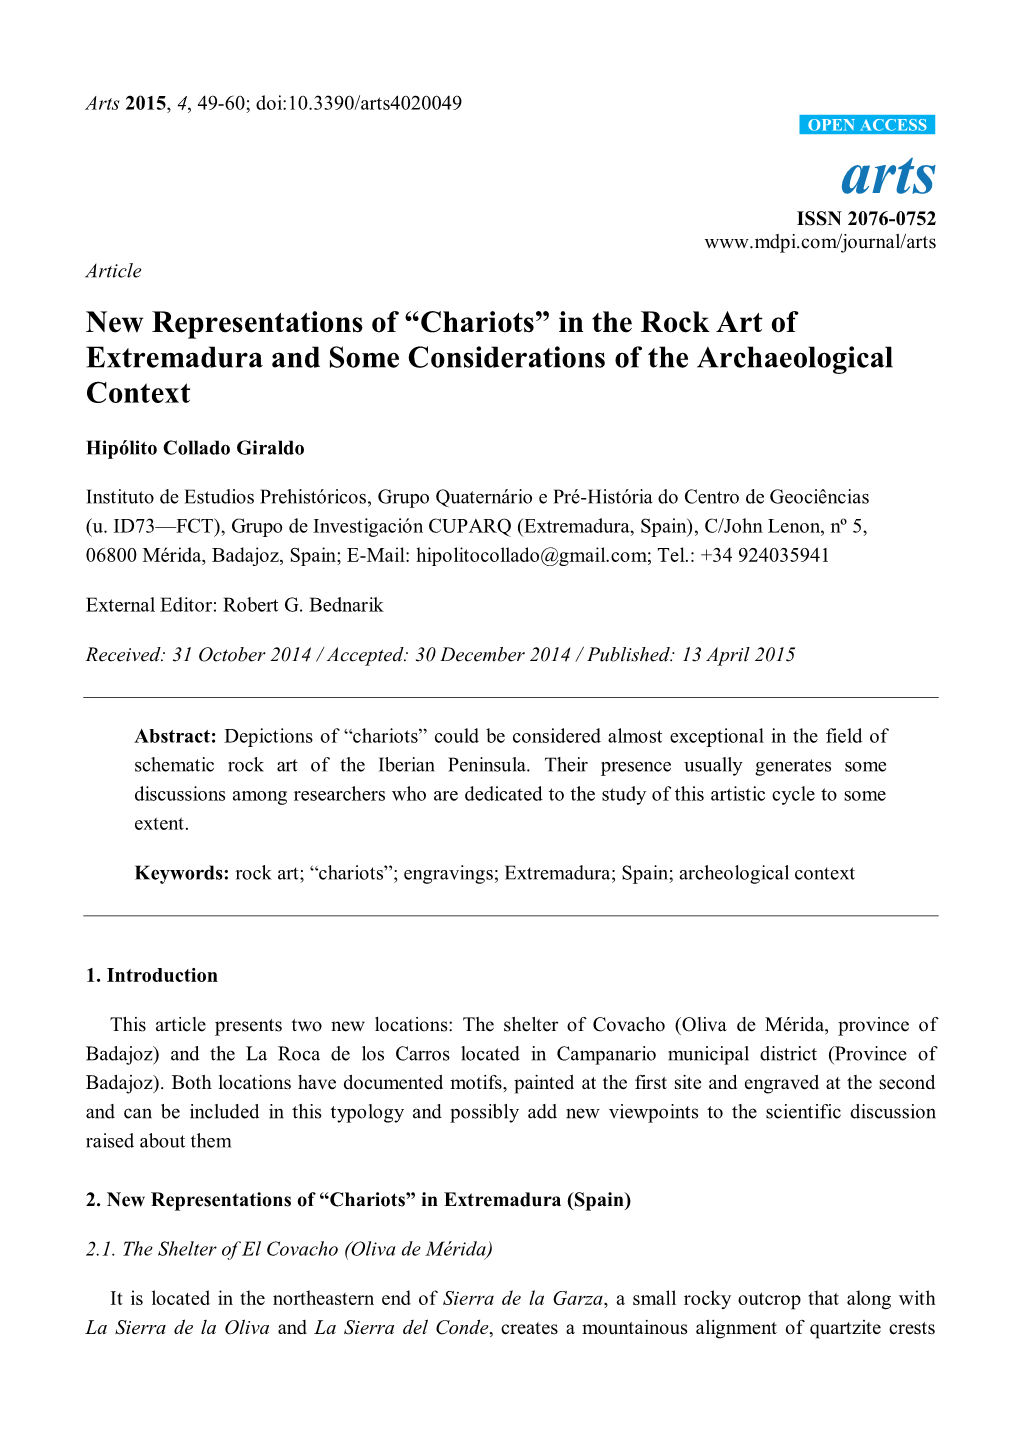 Chariots” in the Rock Art of Extremadura and Some Considerations of the Archaeological Context